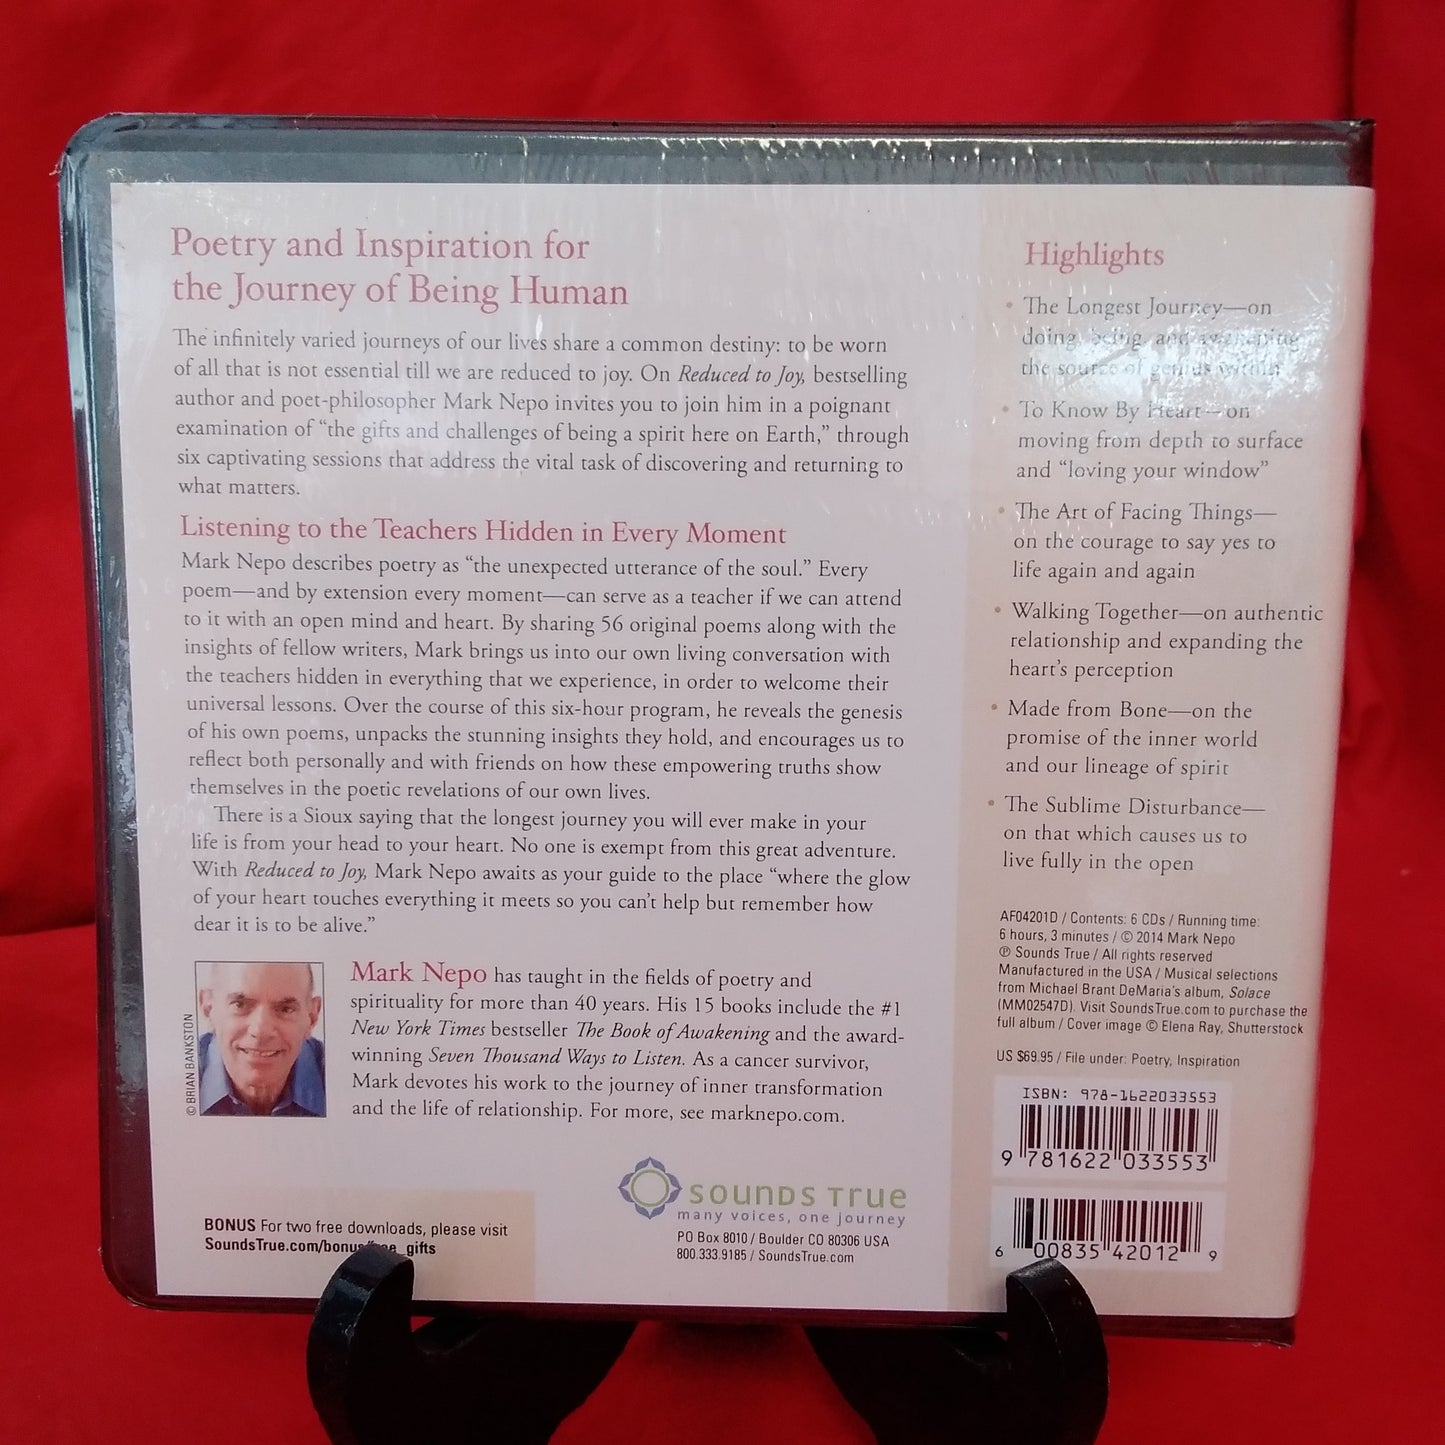 NIB - Reduced to Joy: The Journey from our Head to our Heart - Audio Learning Course 6 CD's